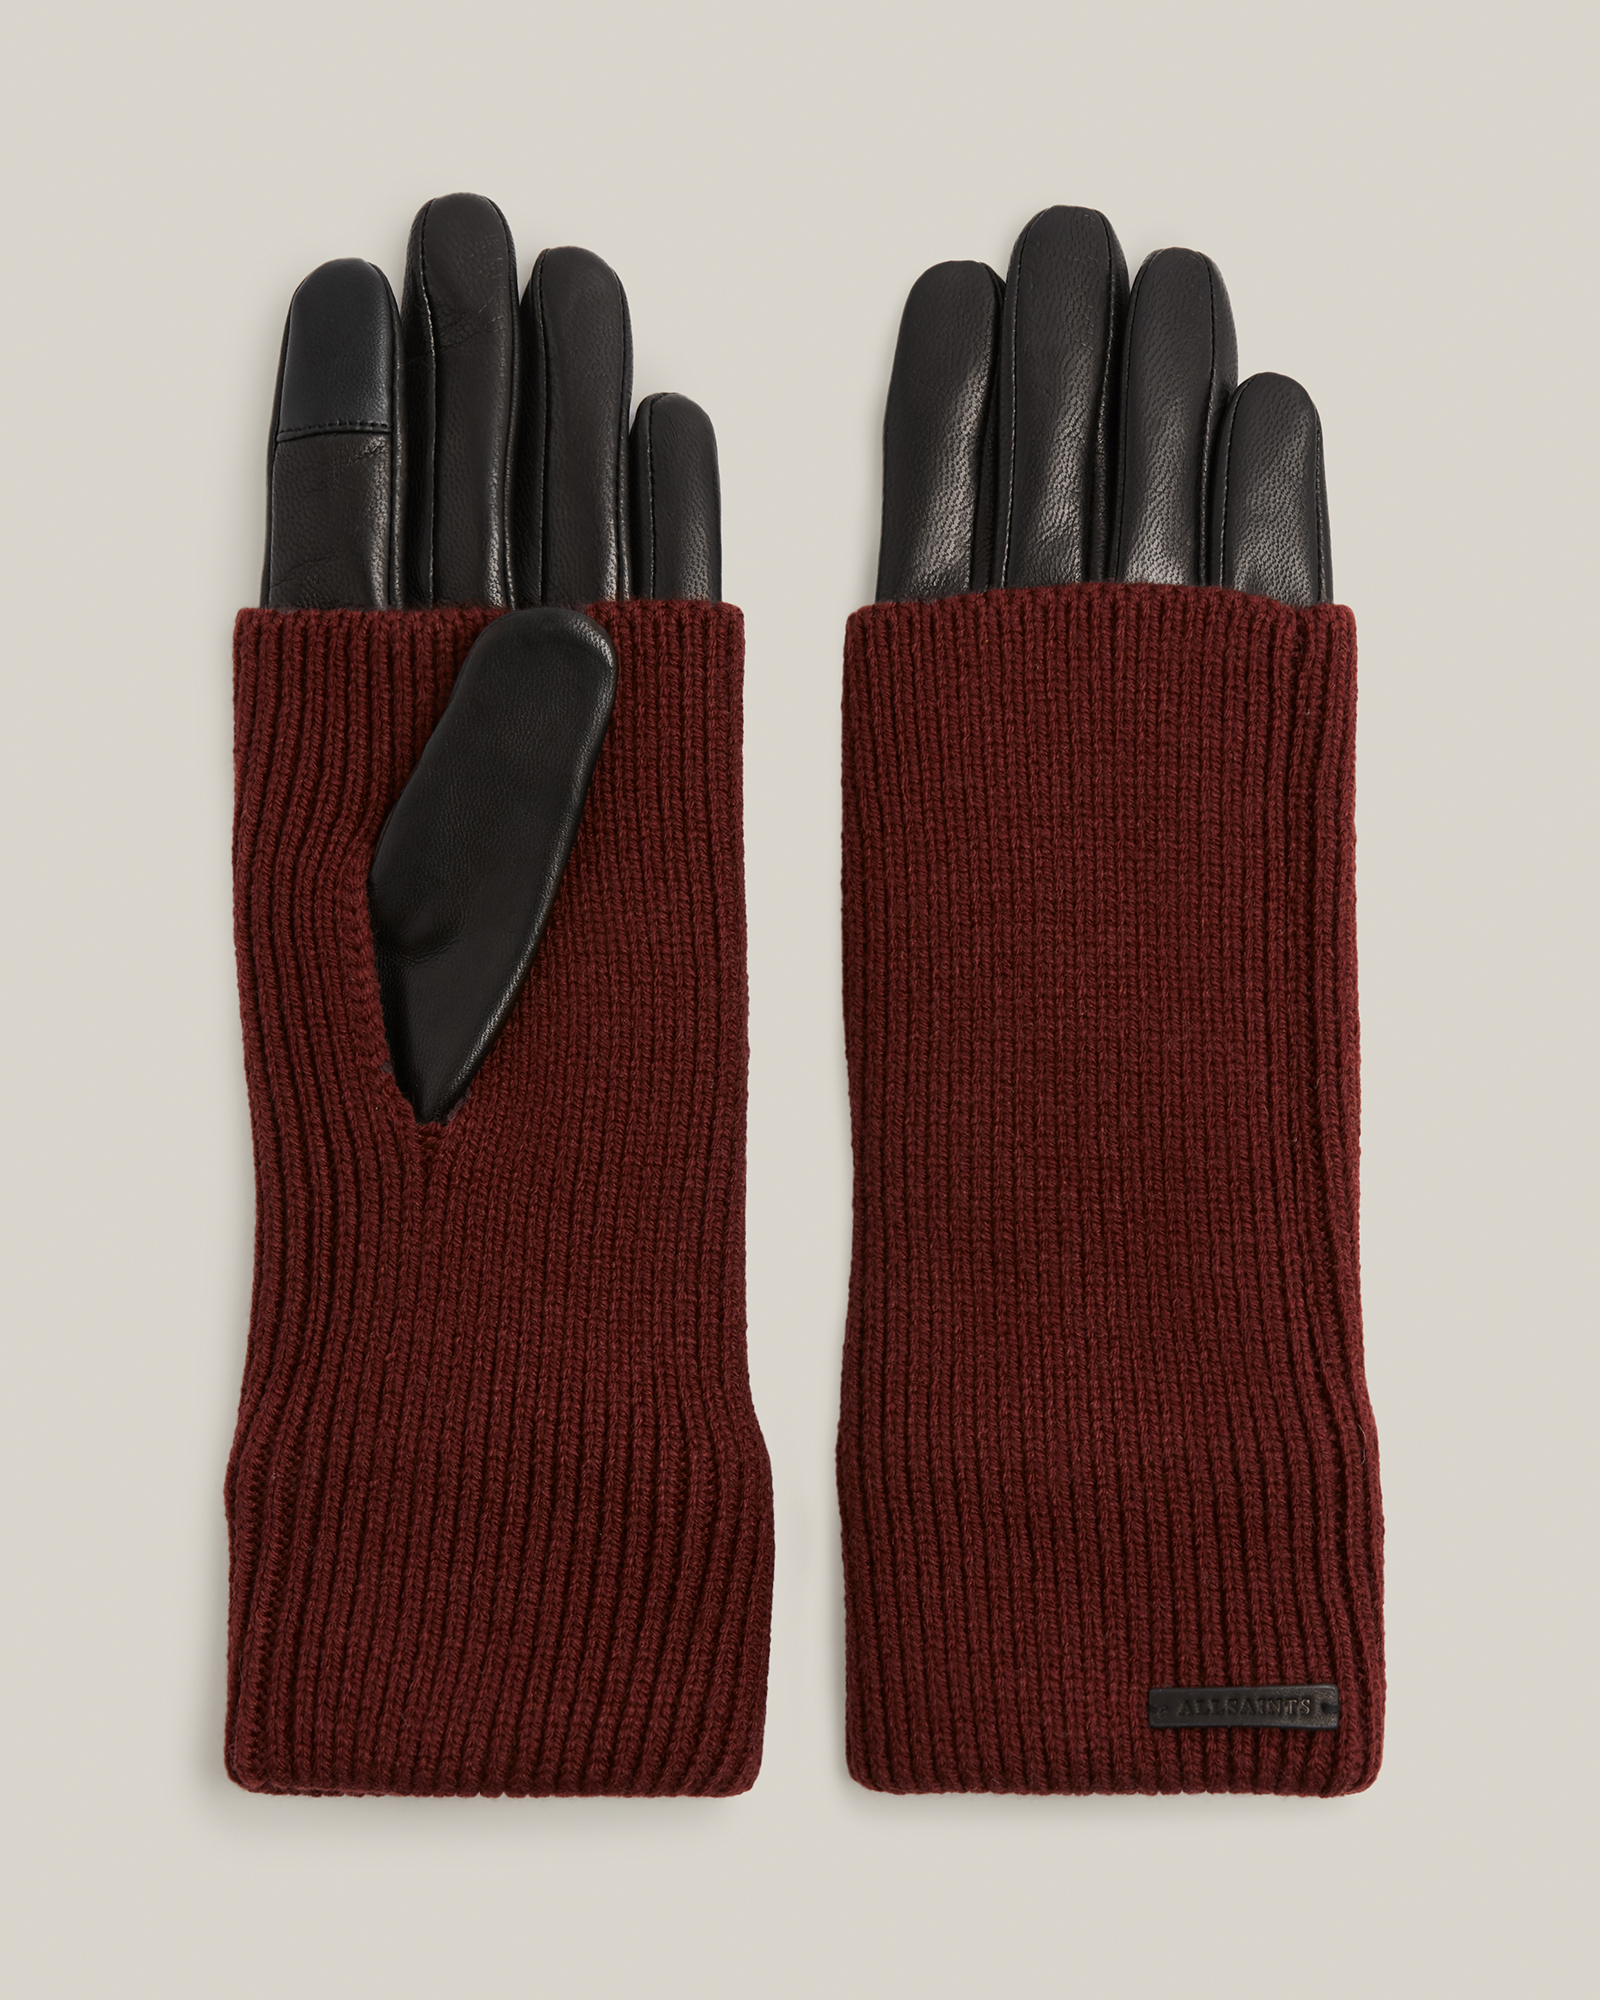 Allsaints Knit Cuff Leather Gloves